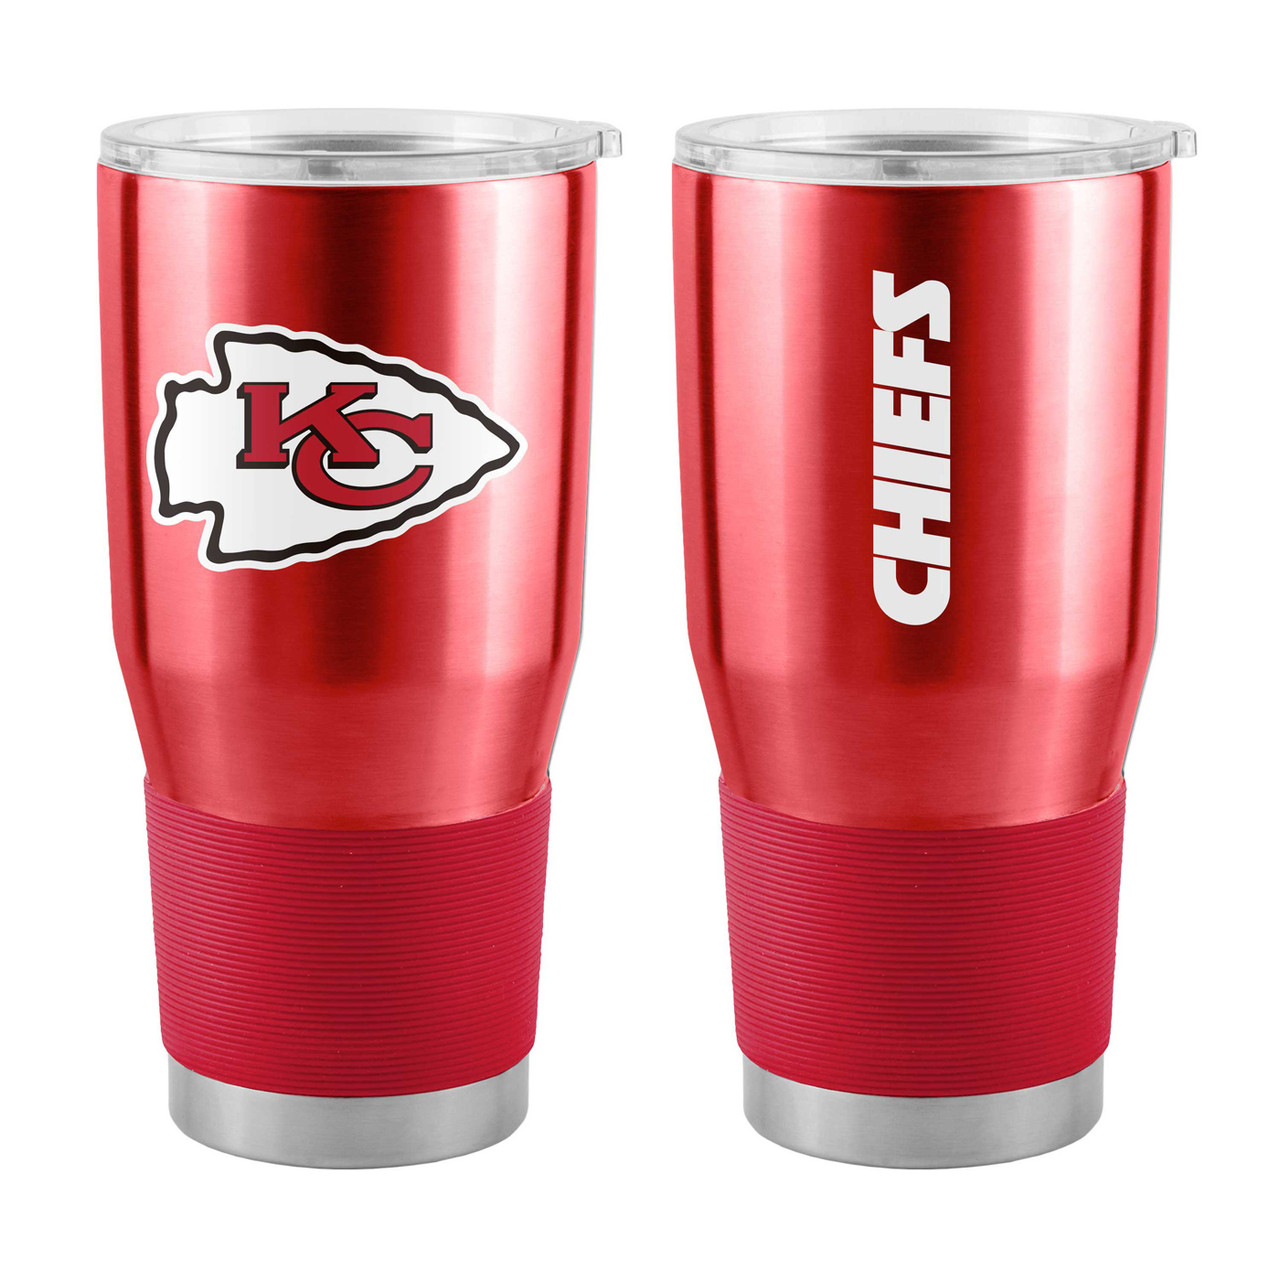 Kansas City Chiefs 16oz. Colorblock Stainless Steel Curved Tumbler